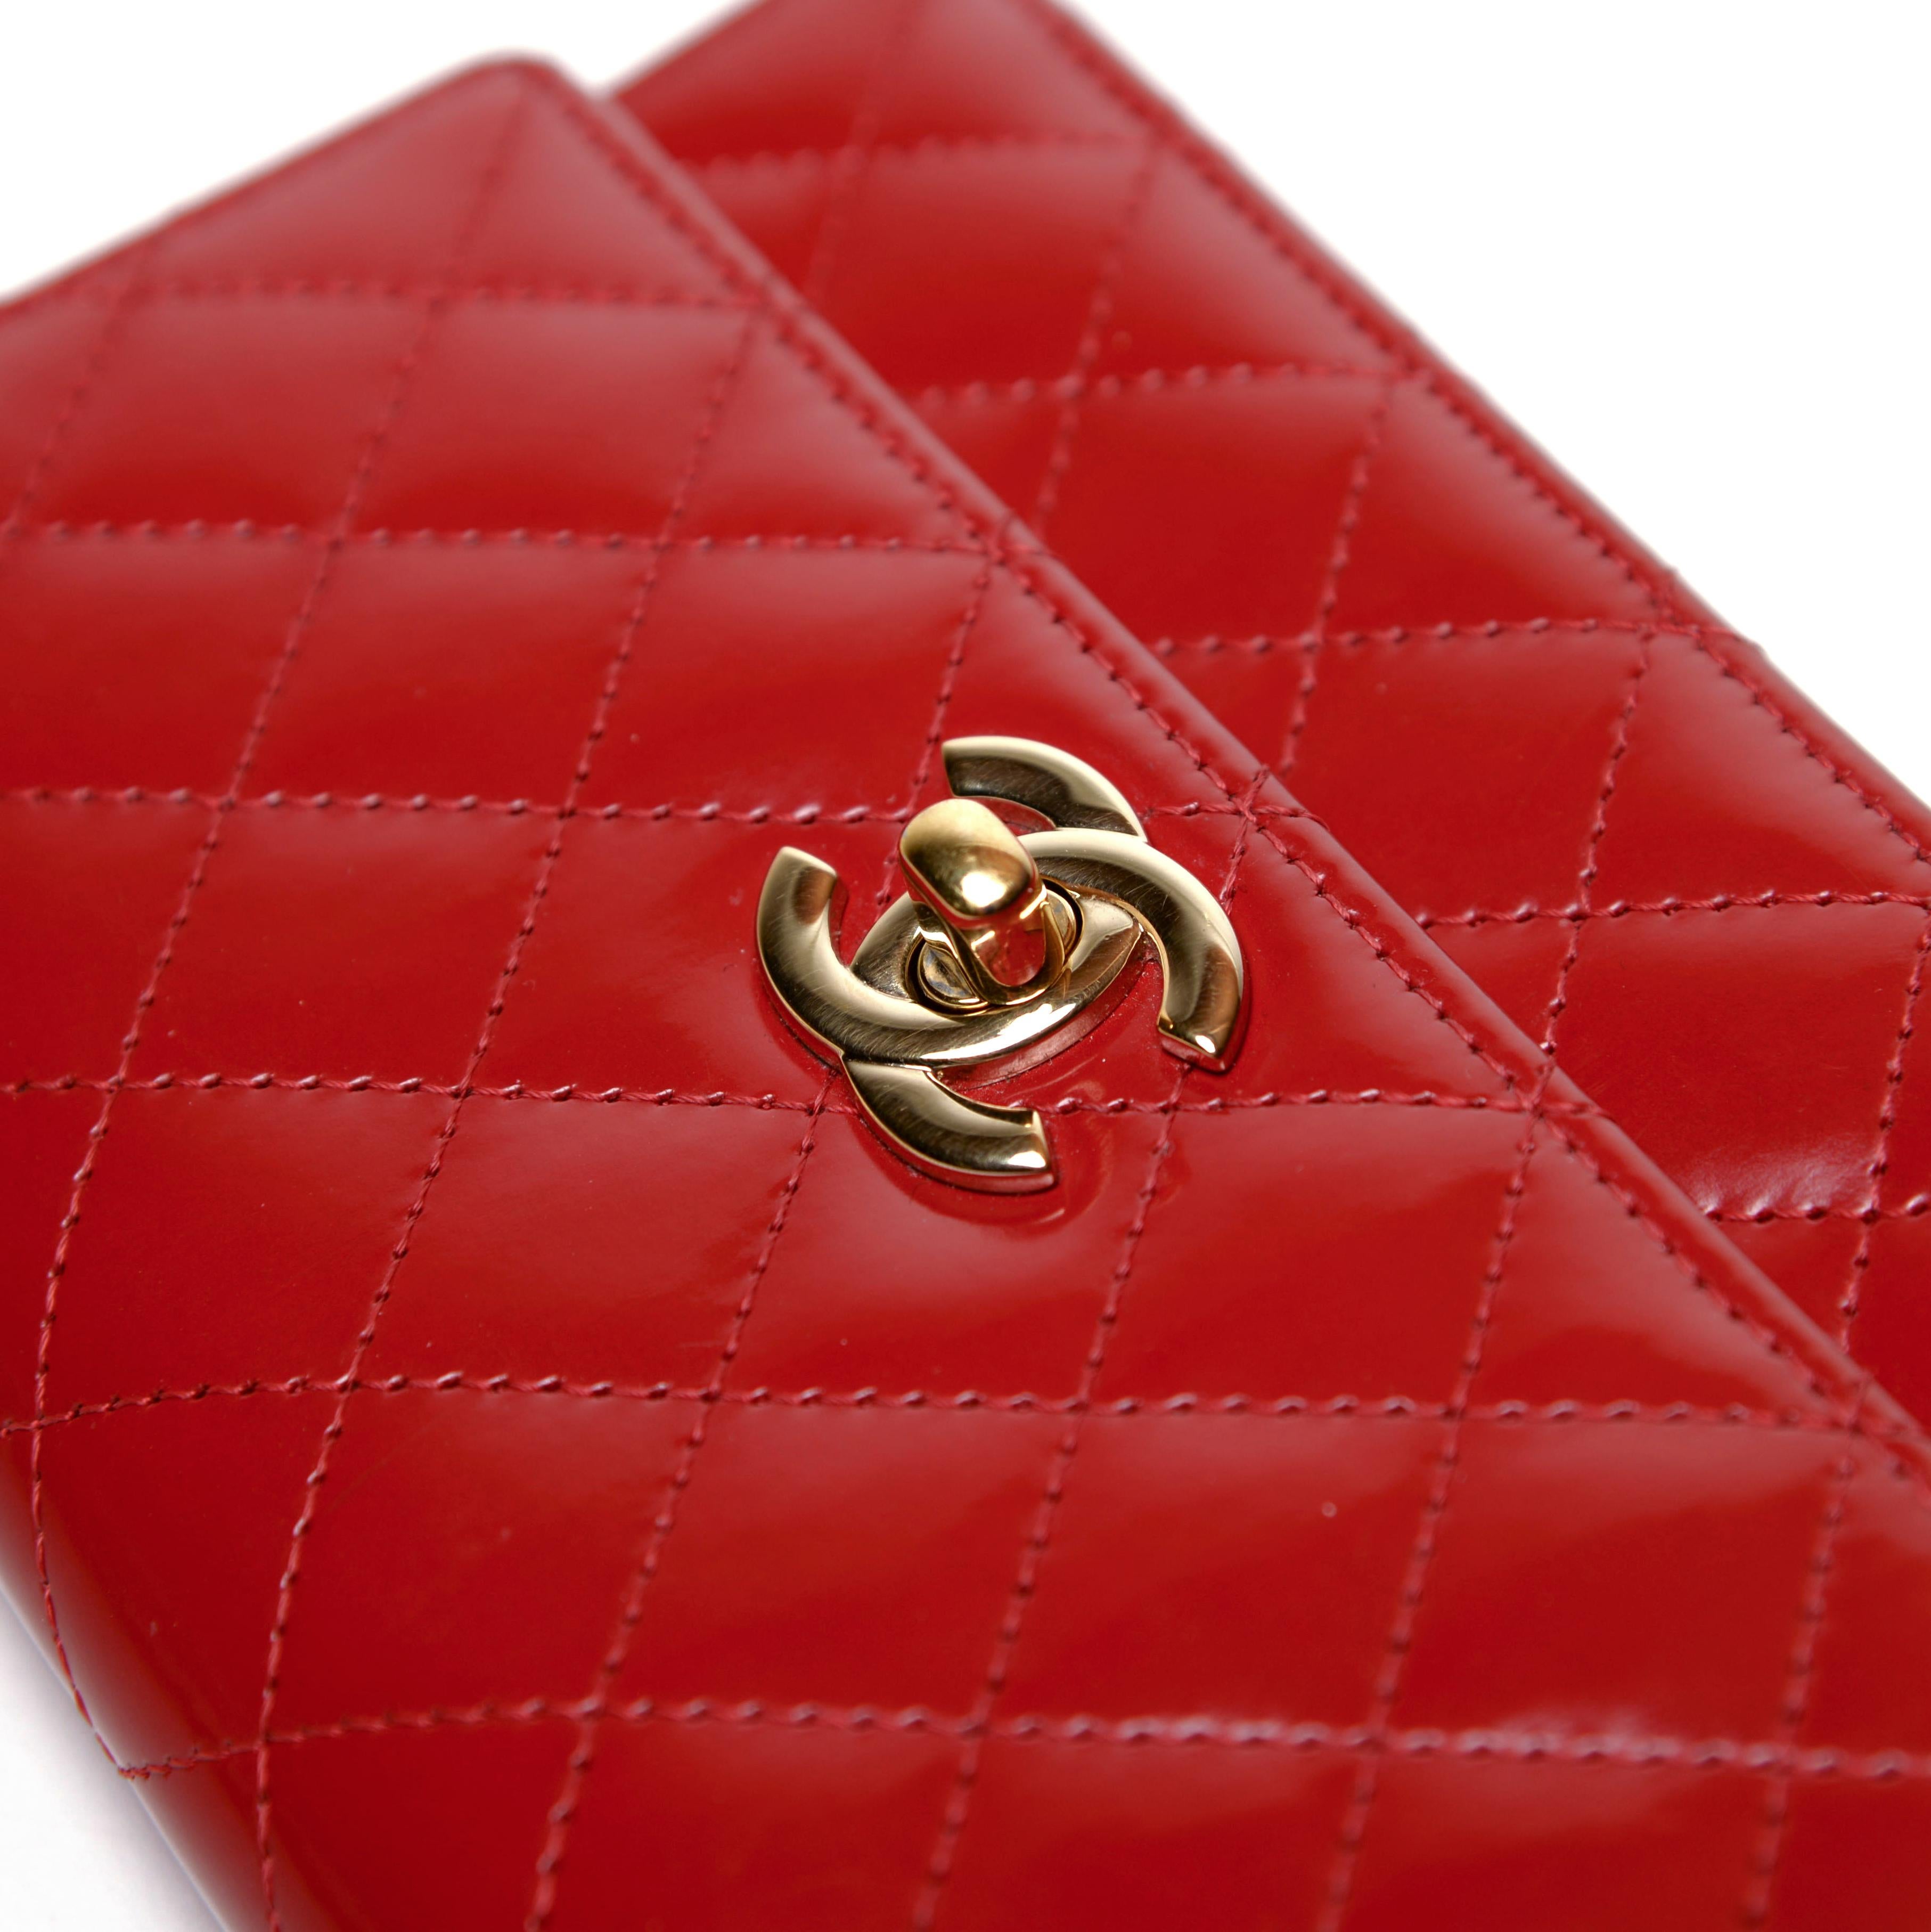 Chanel Classic Red Mini Flap Bag Patent Leather For Sale 7